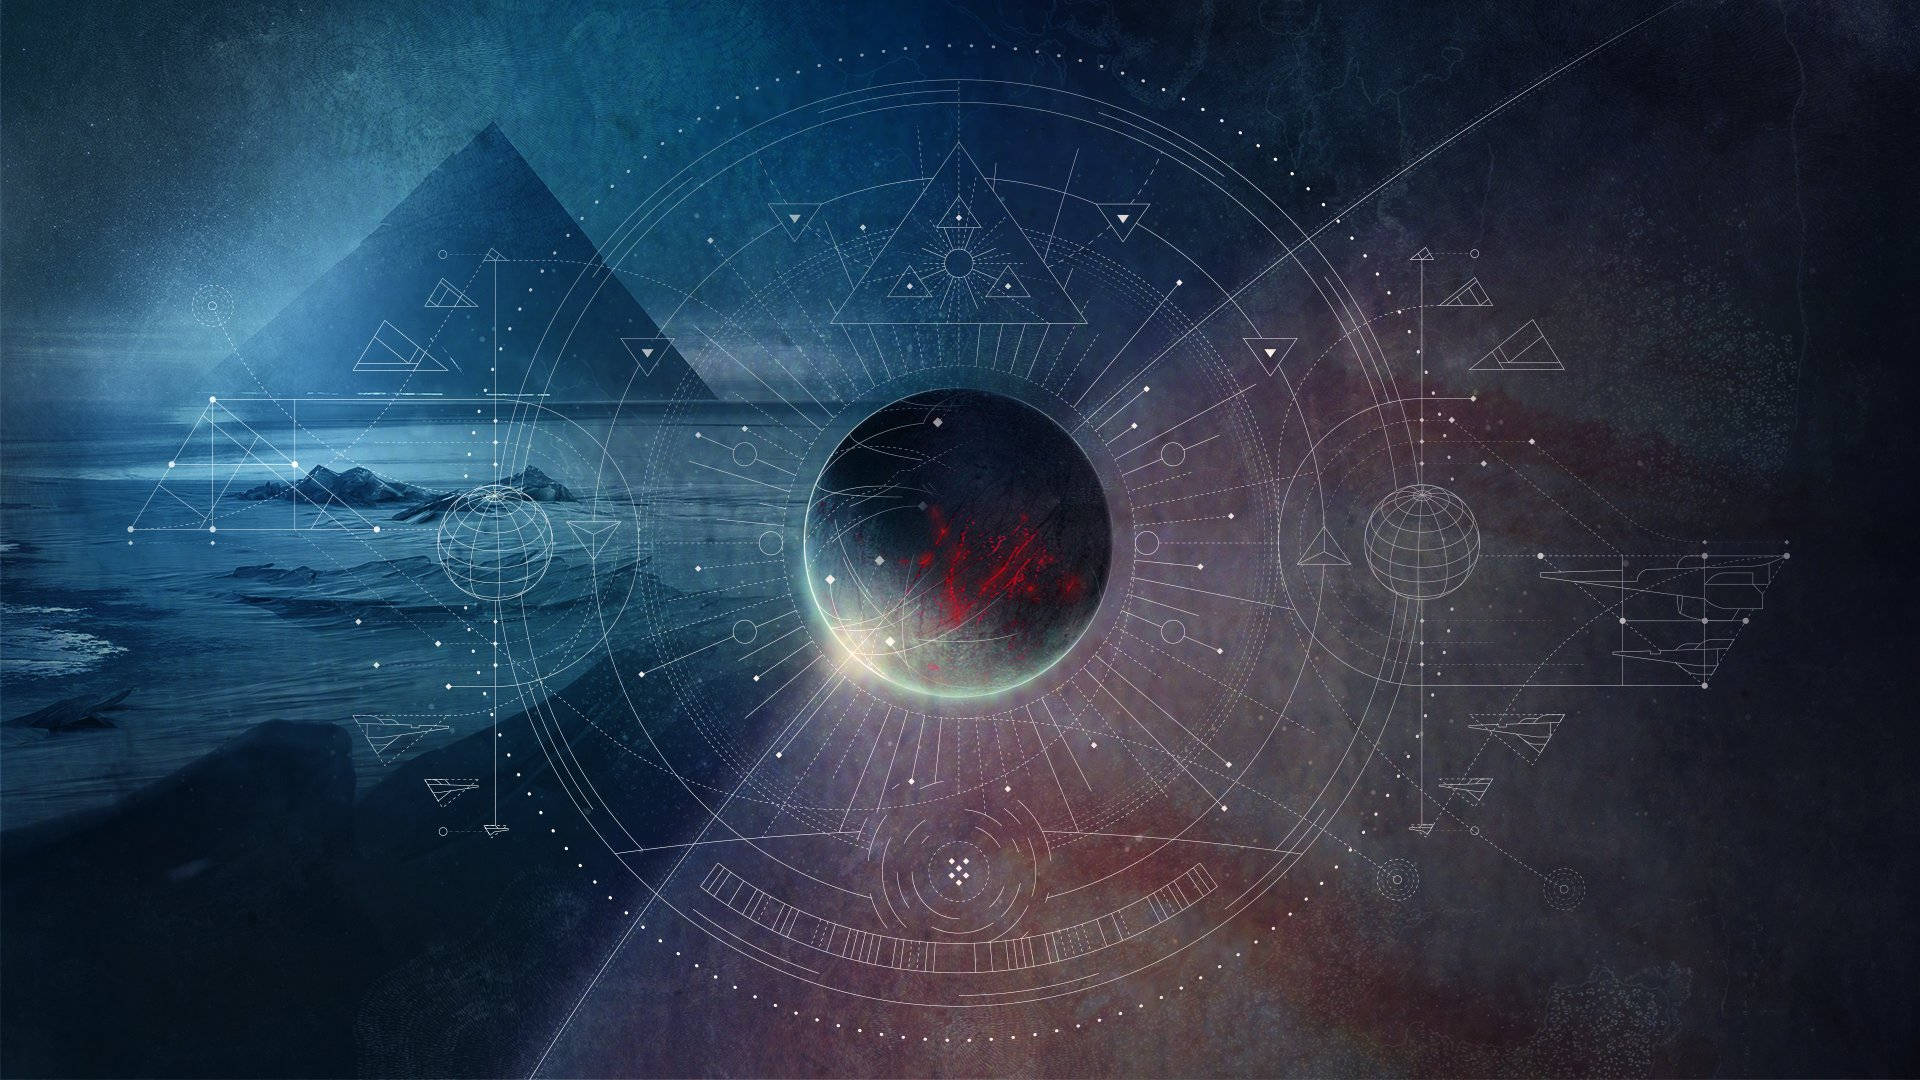 A Dark Image Of A Pyramid And A Spaceship Wallpaper